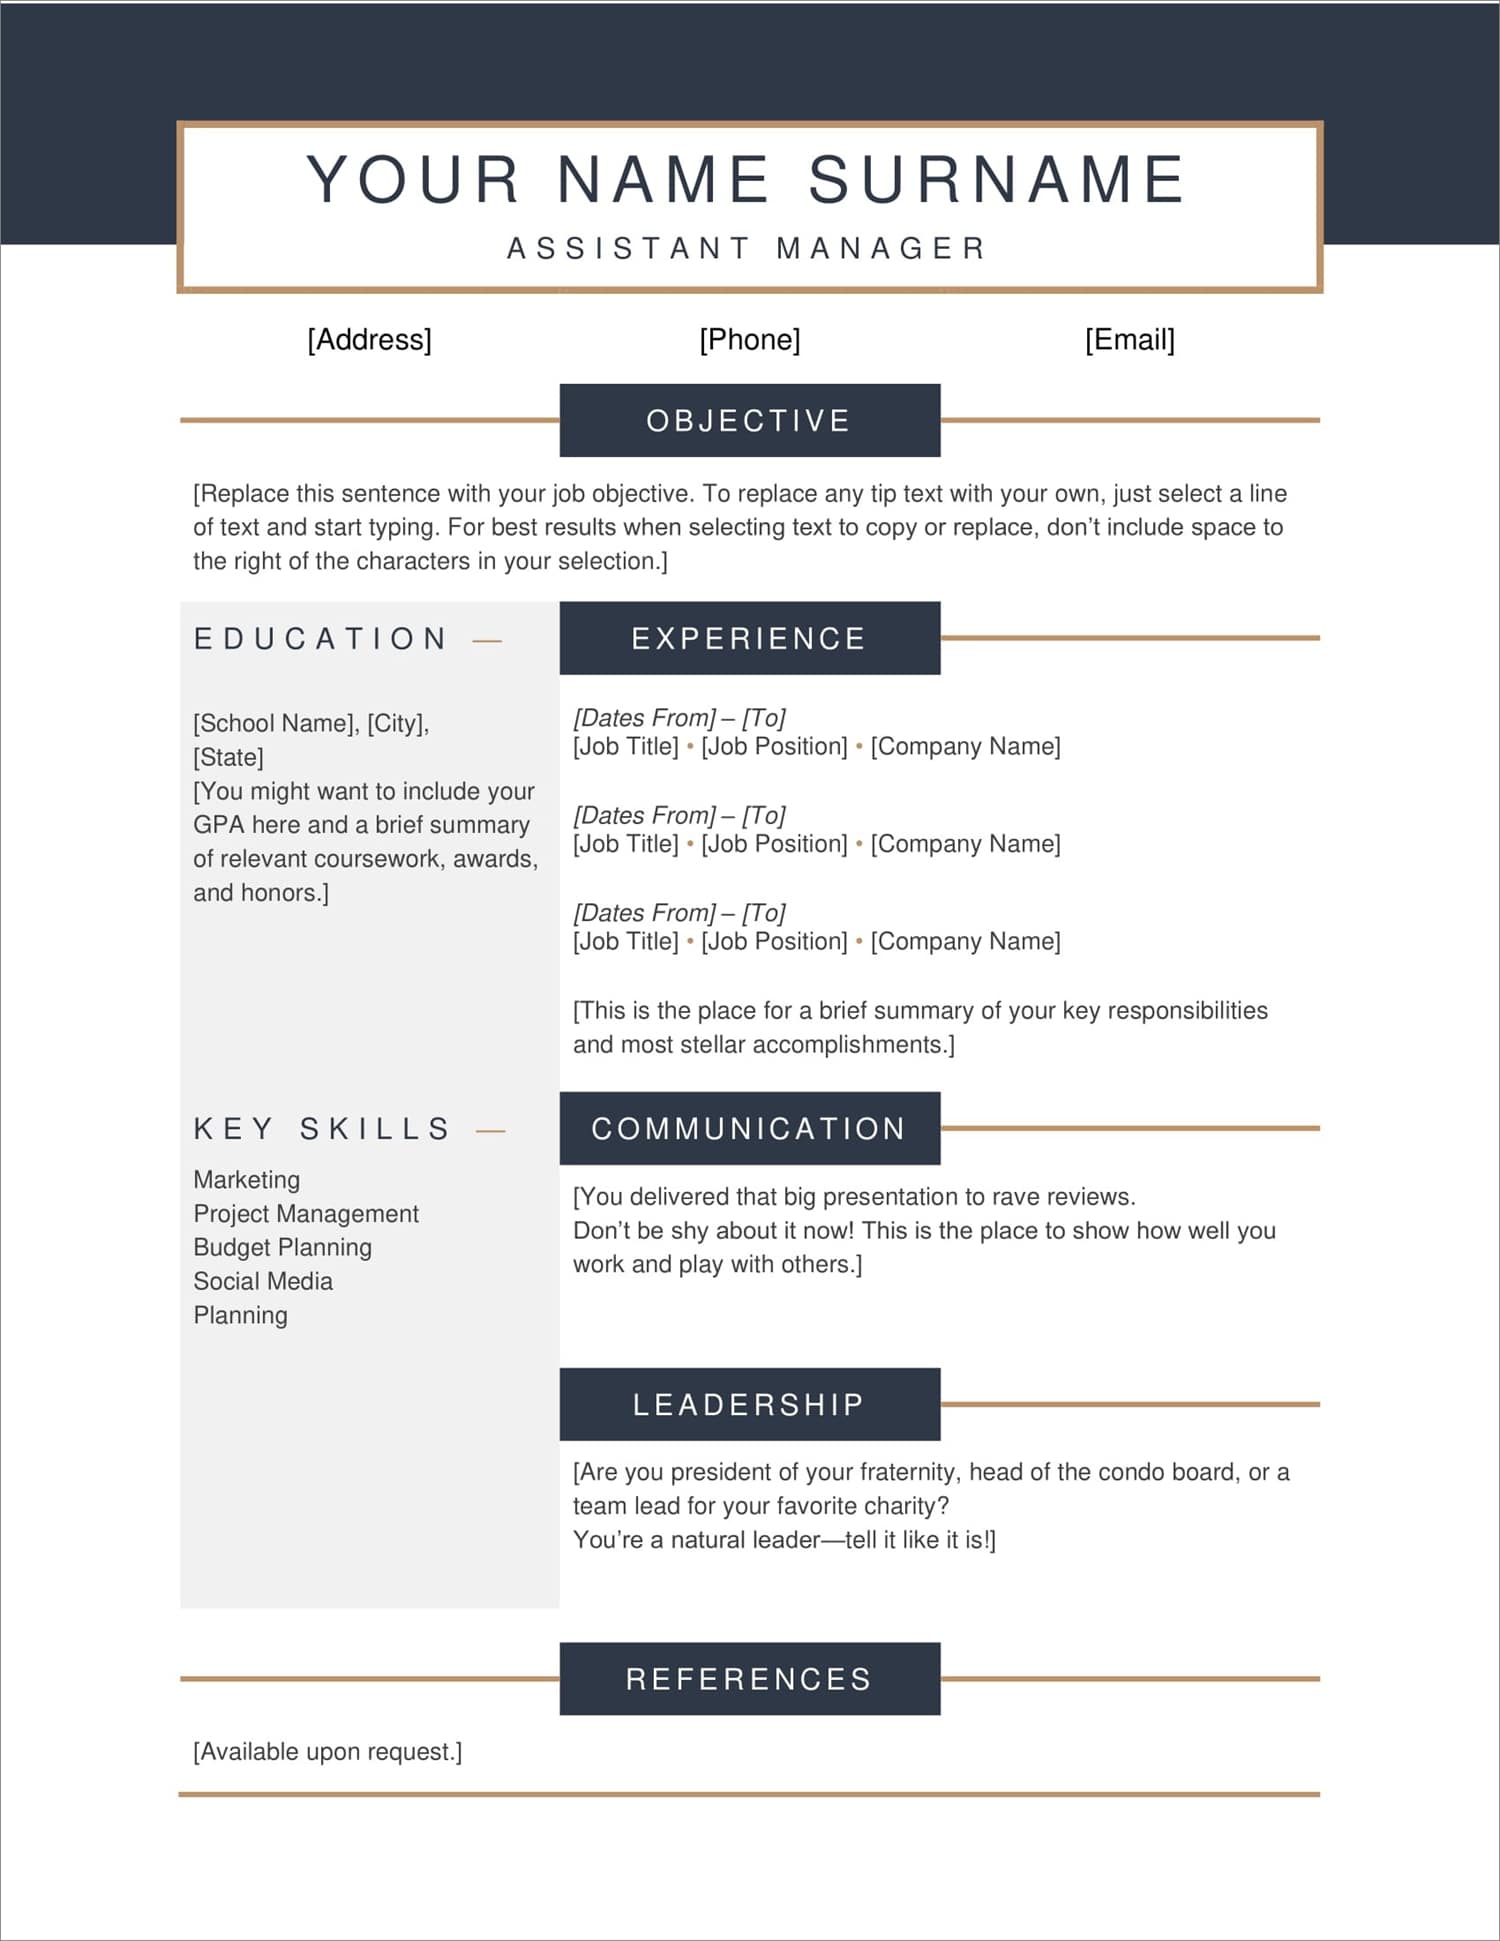 Free Online Resume Templates from cdn-images.zety.com